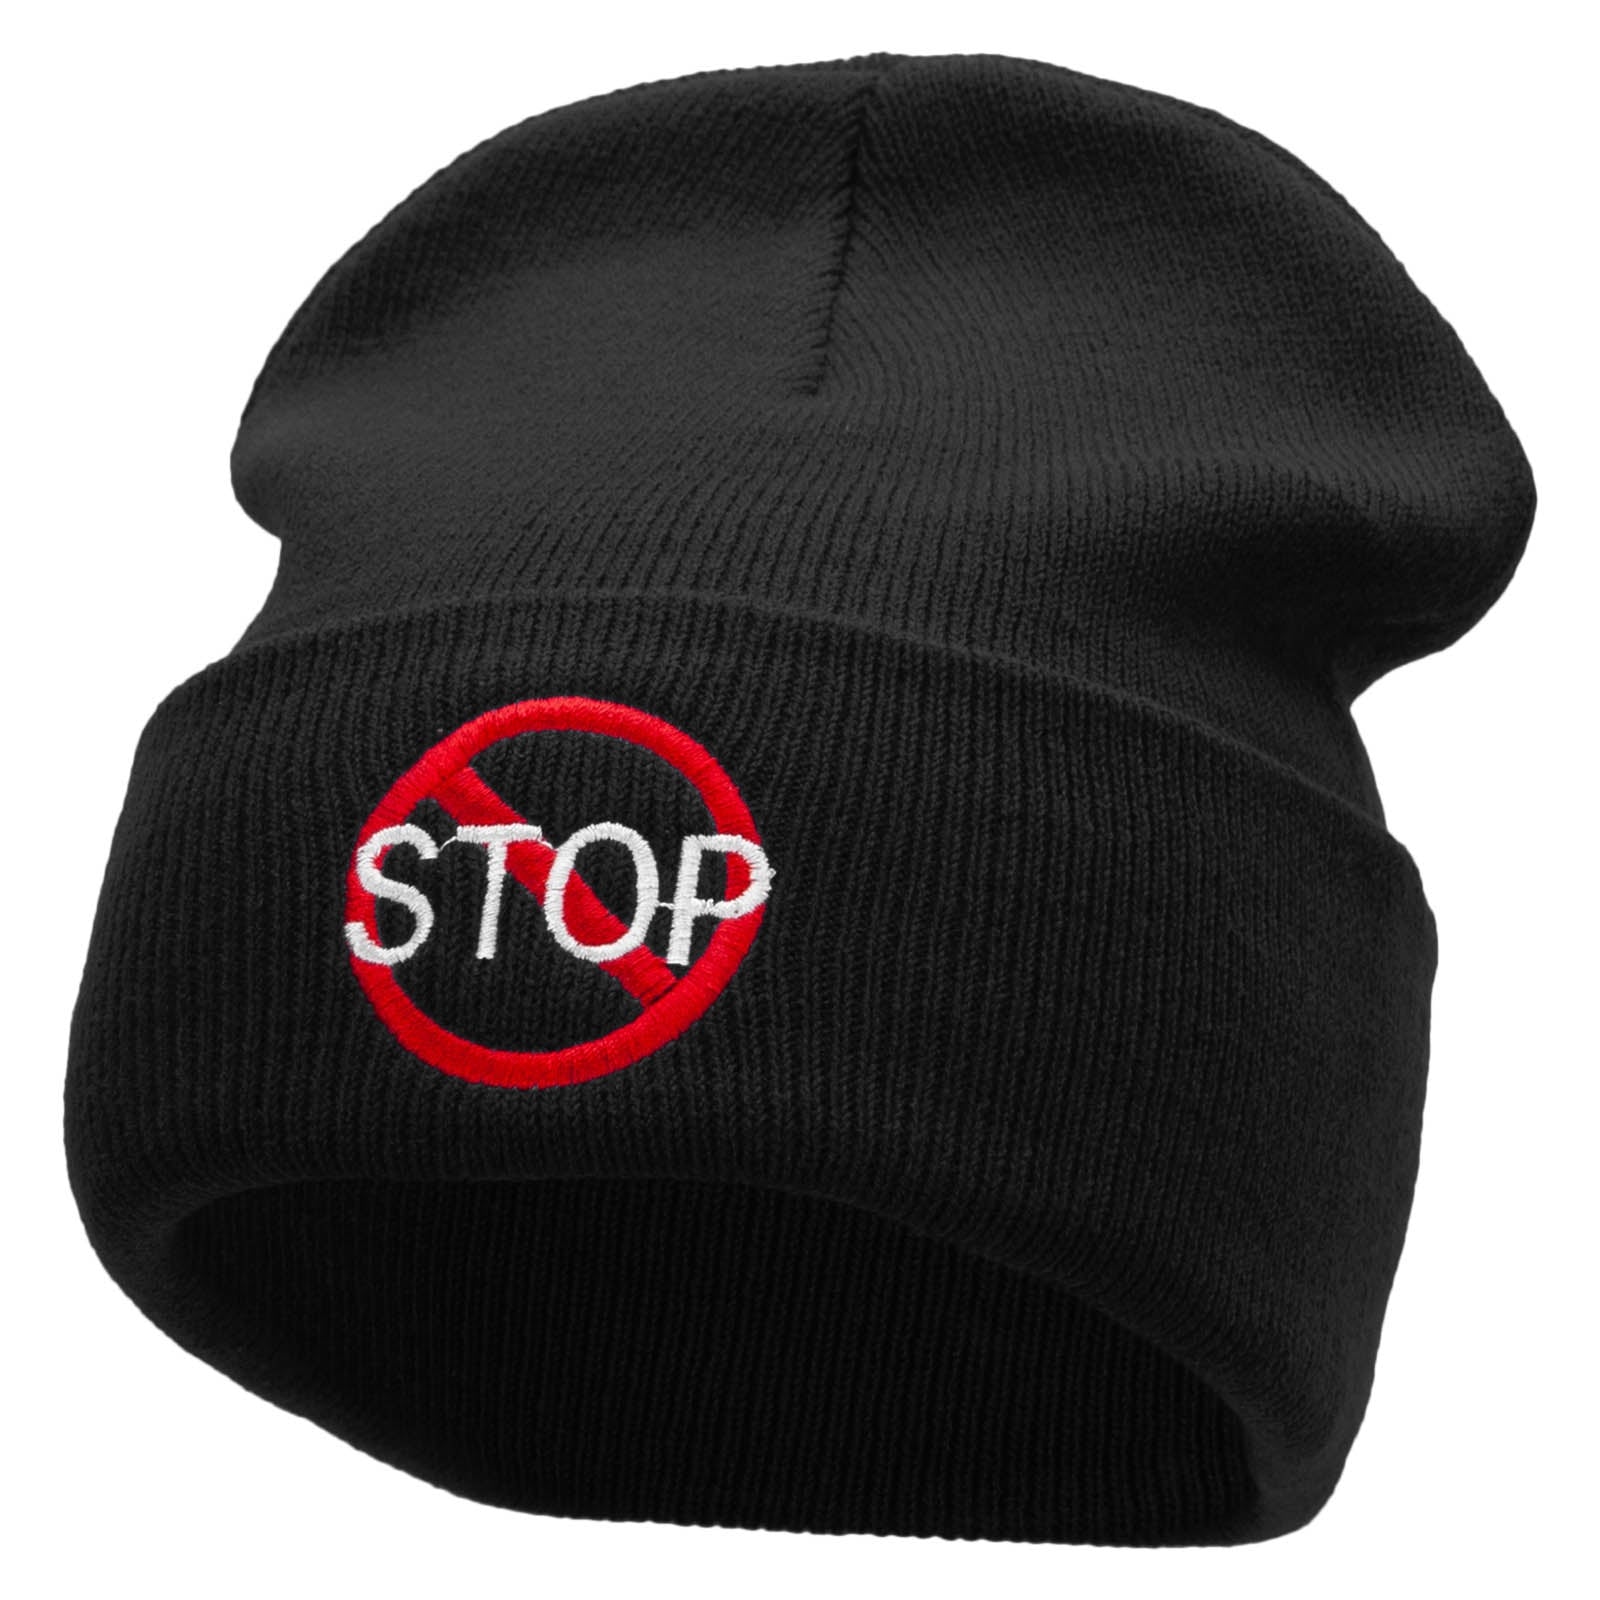 Stop Embroidered 12 Inch Long Knitted Beanie - Black OSFM